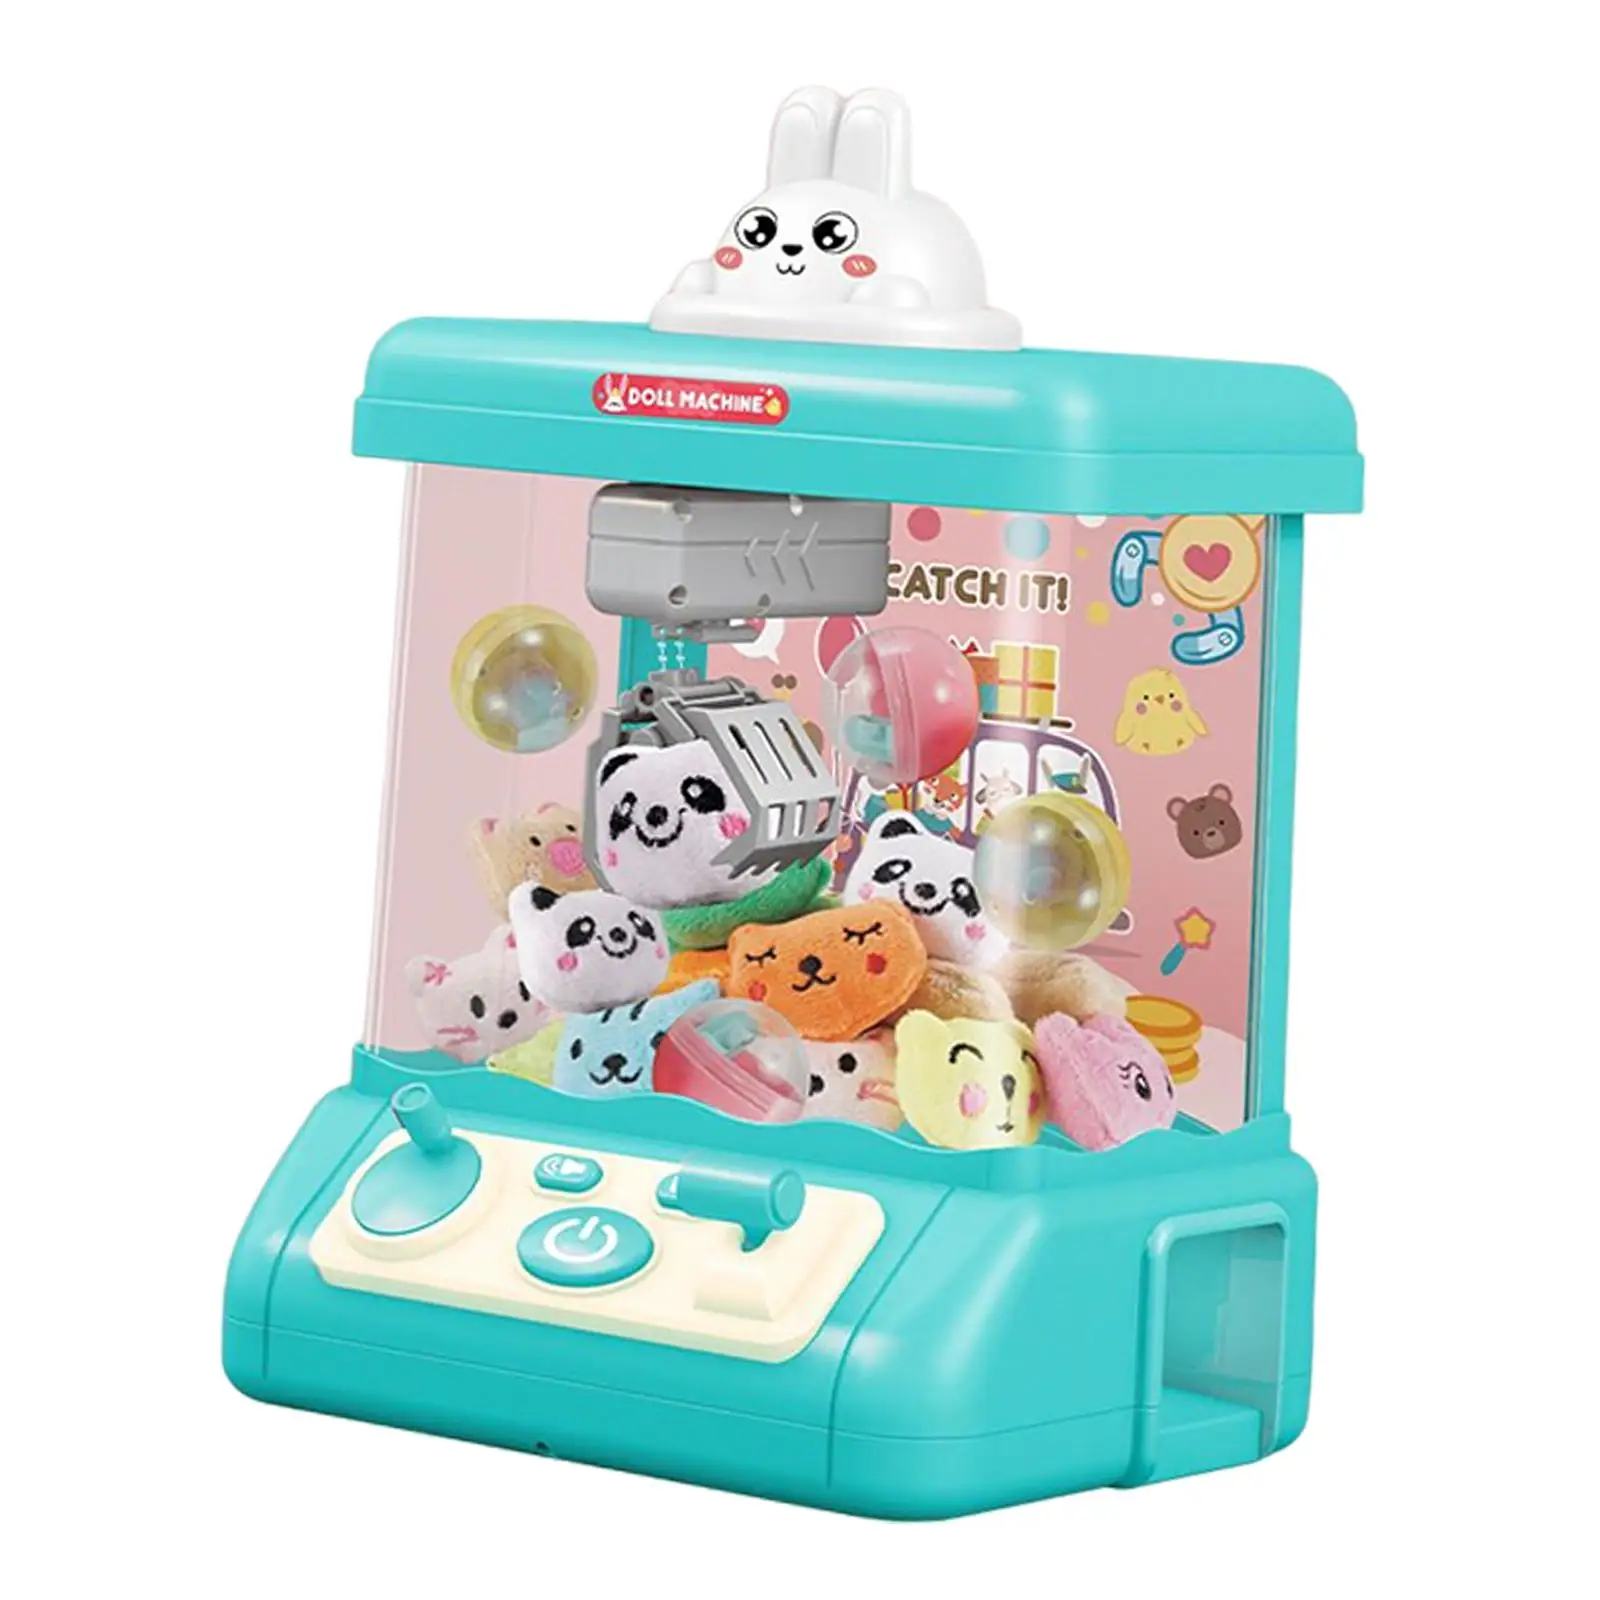 Kids Claw Machine with Lights Sound Arcade Game Electronic Small Catching Doll Machine Slot Machine Claw Toy for Birthday Gifts